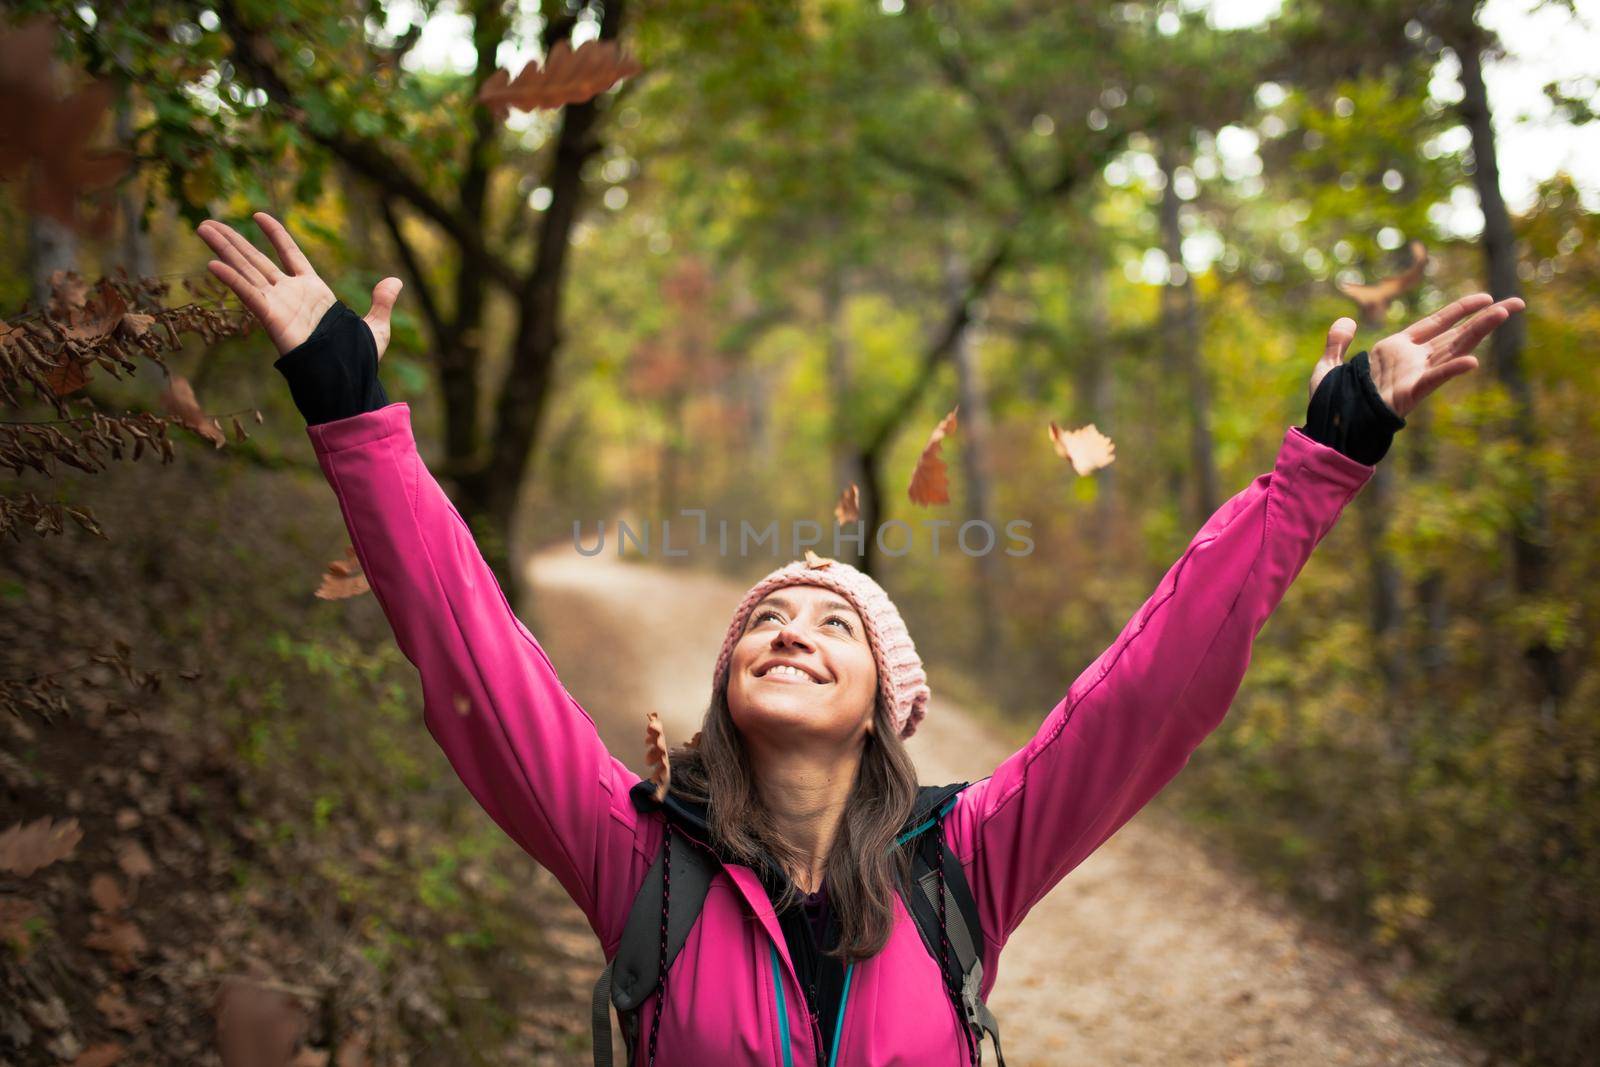 Hiking girl in pink on a trail in the forest. Hands up enjoying the falling leaves in nature in fall season. by kokimk